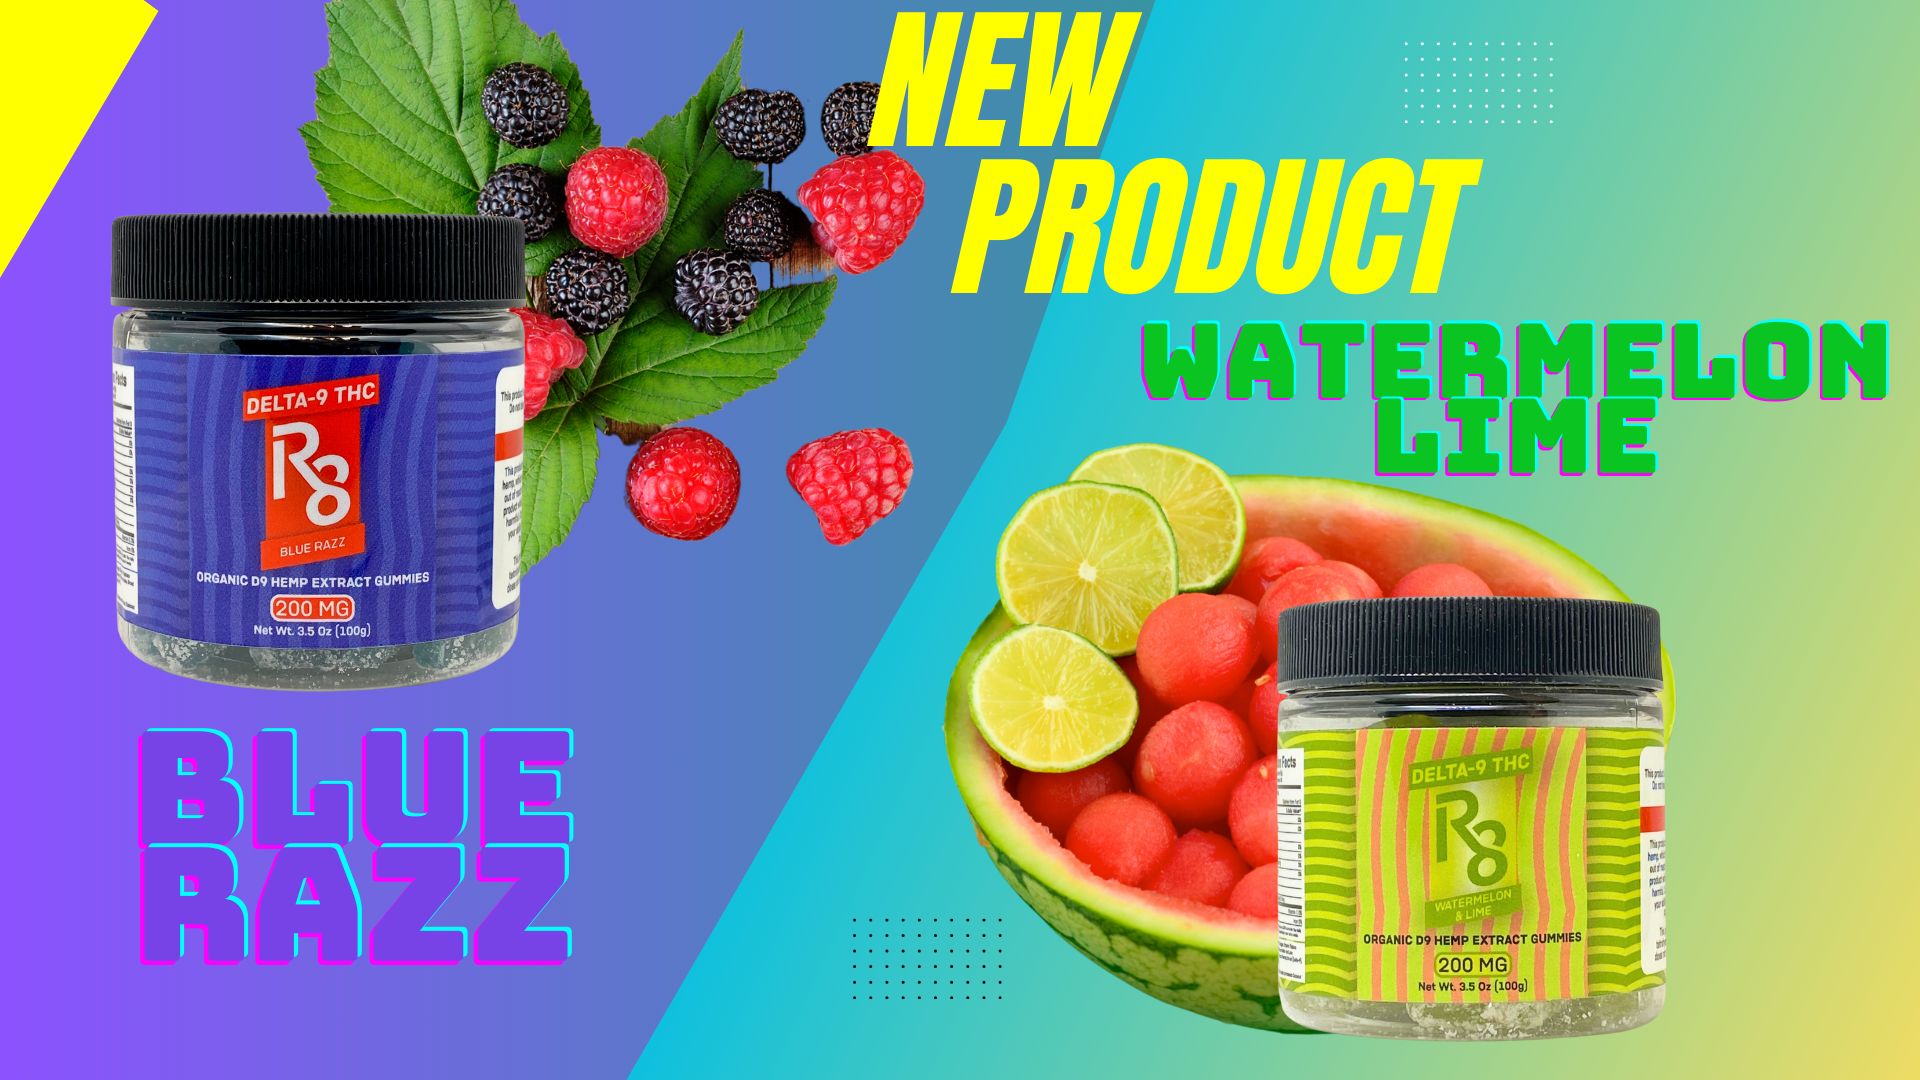 New Product Blue Razz and Watermelon Lime